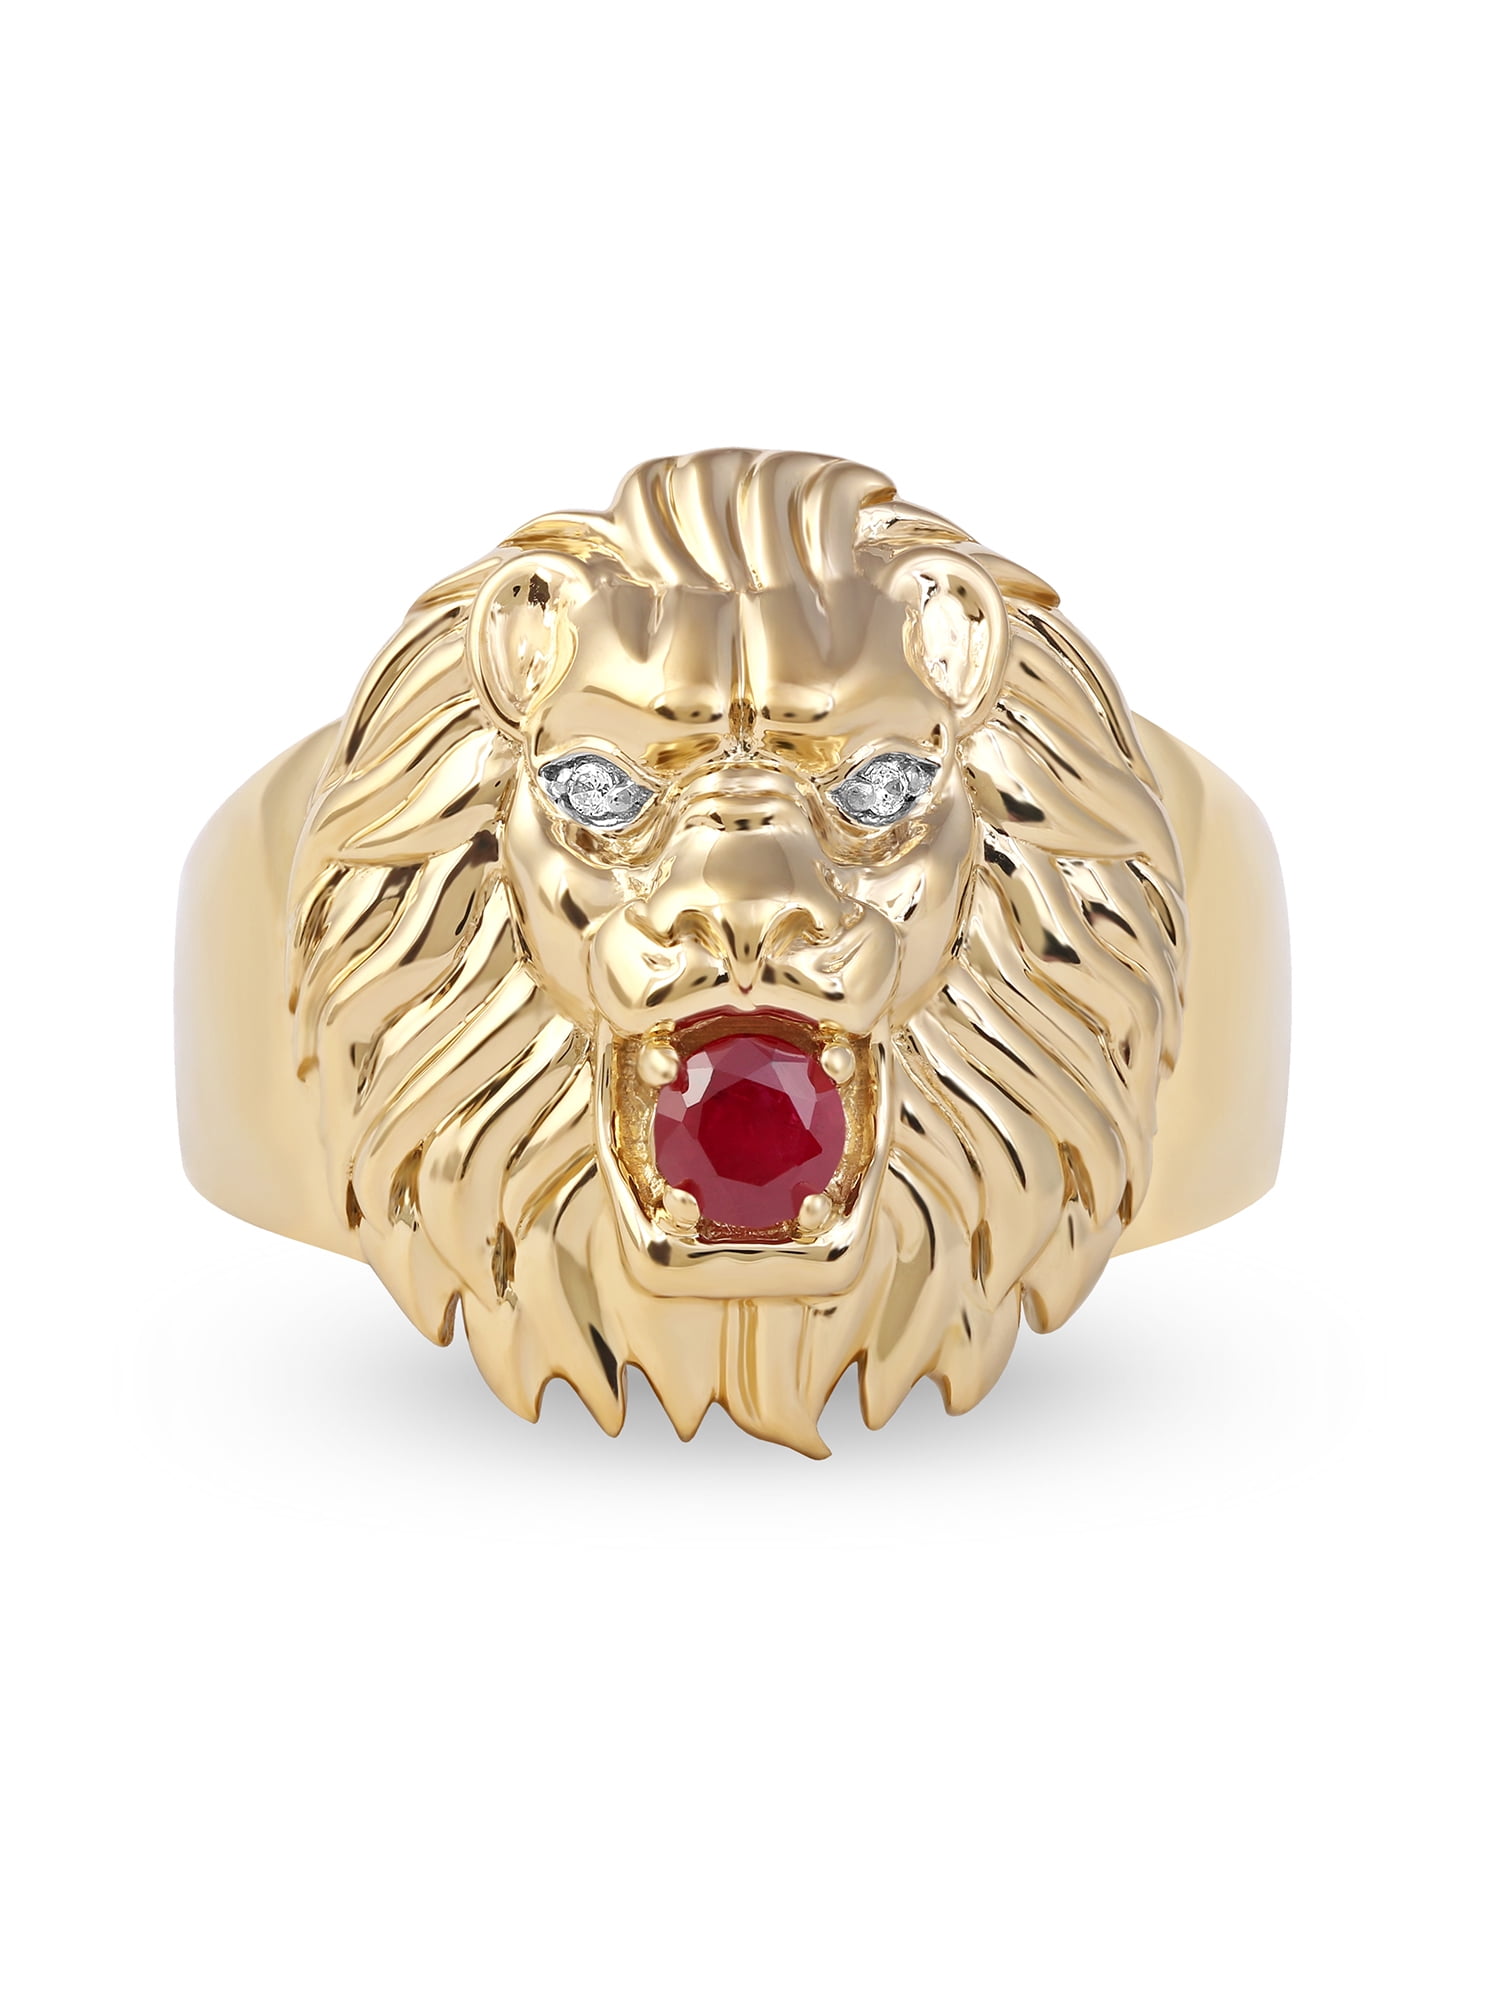 The Lion Ring in 22k Gold